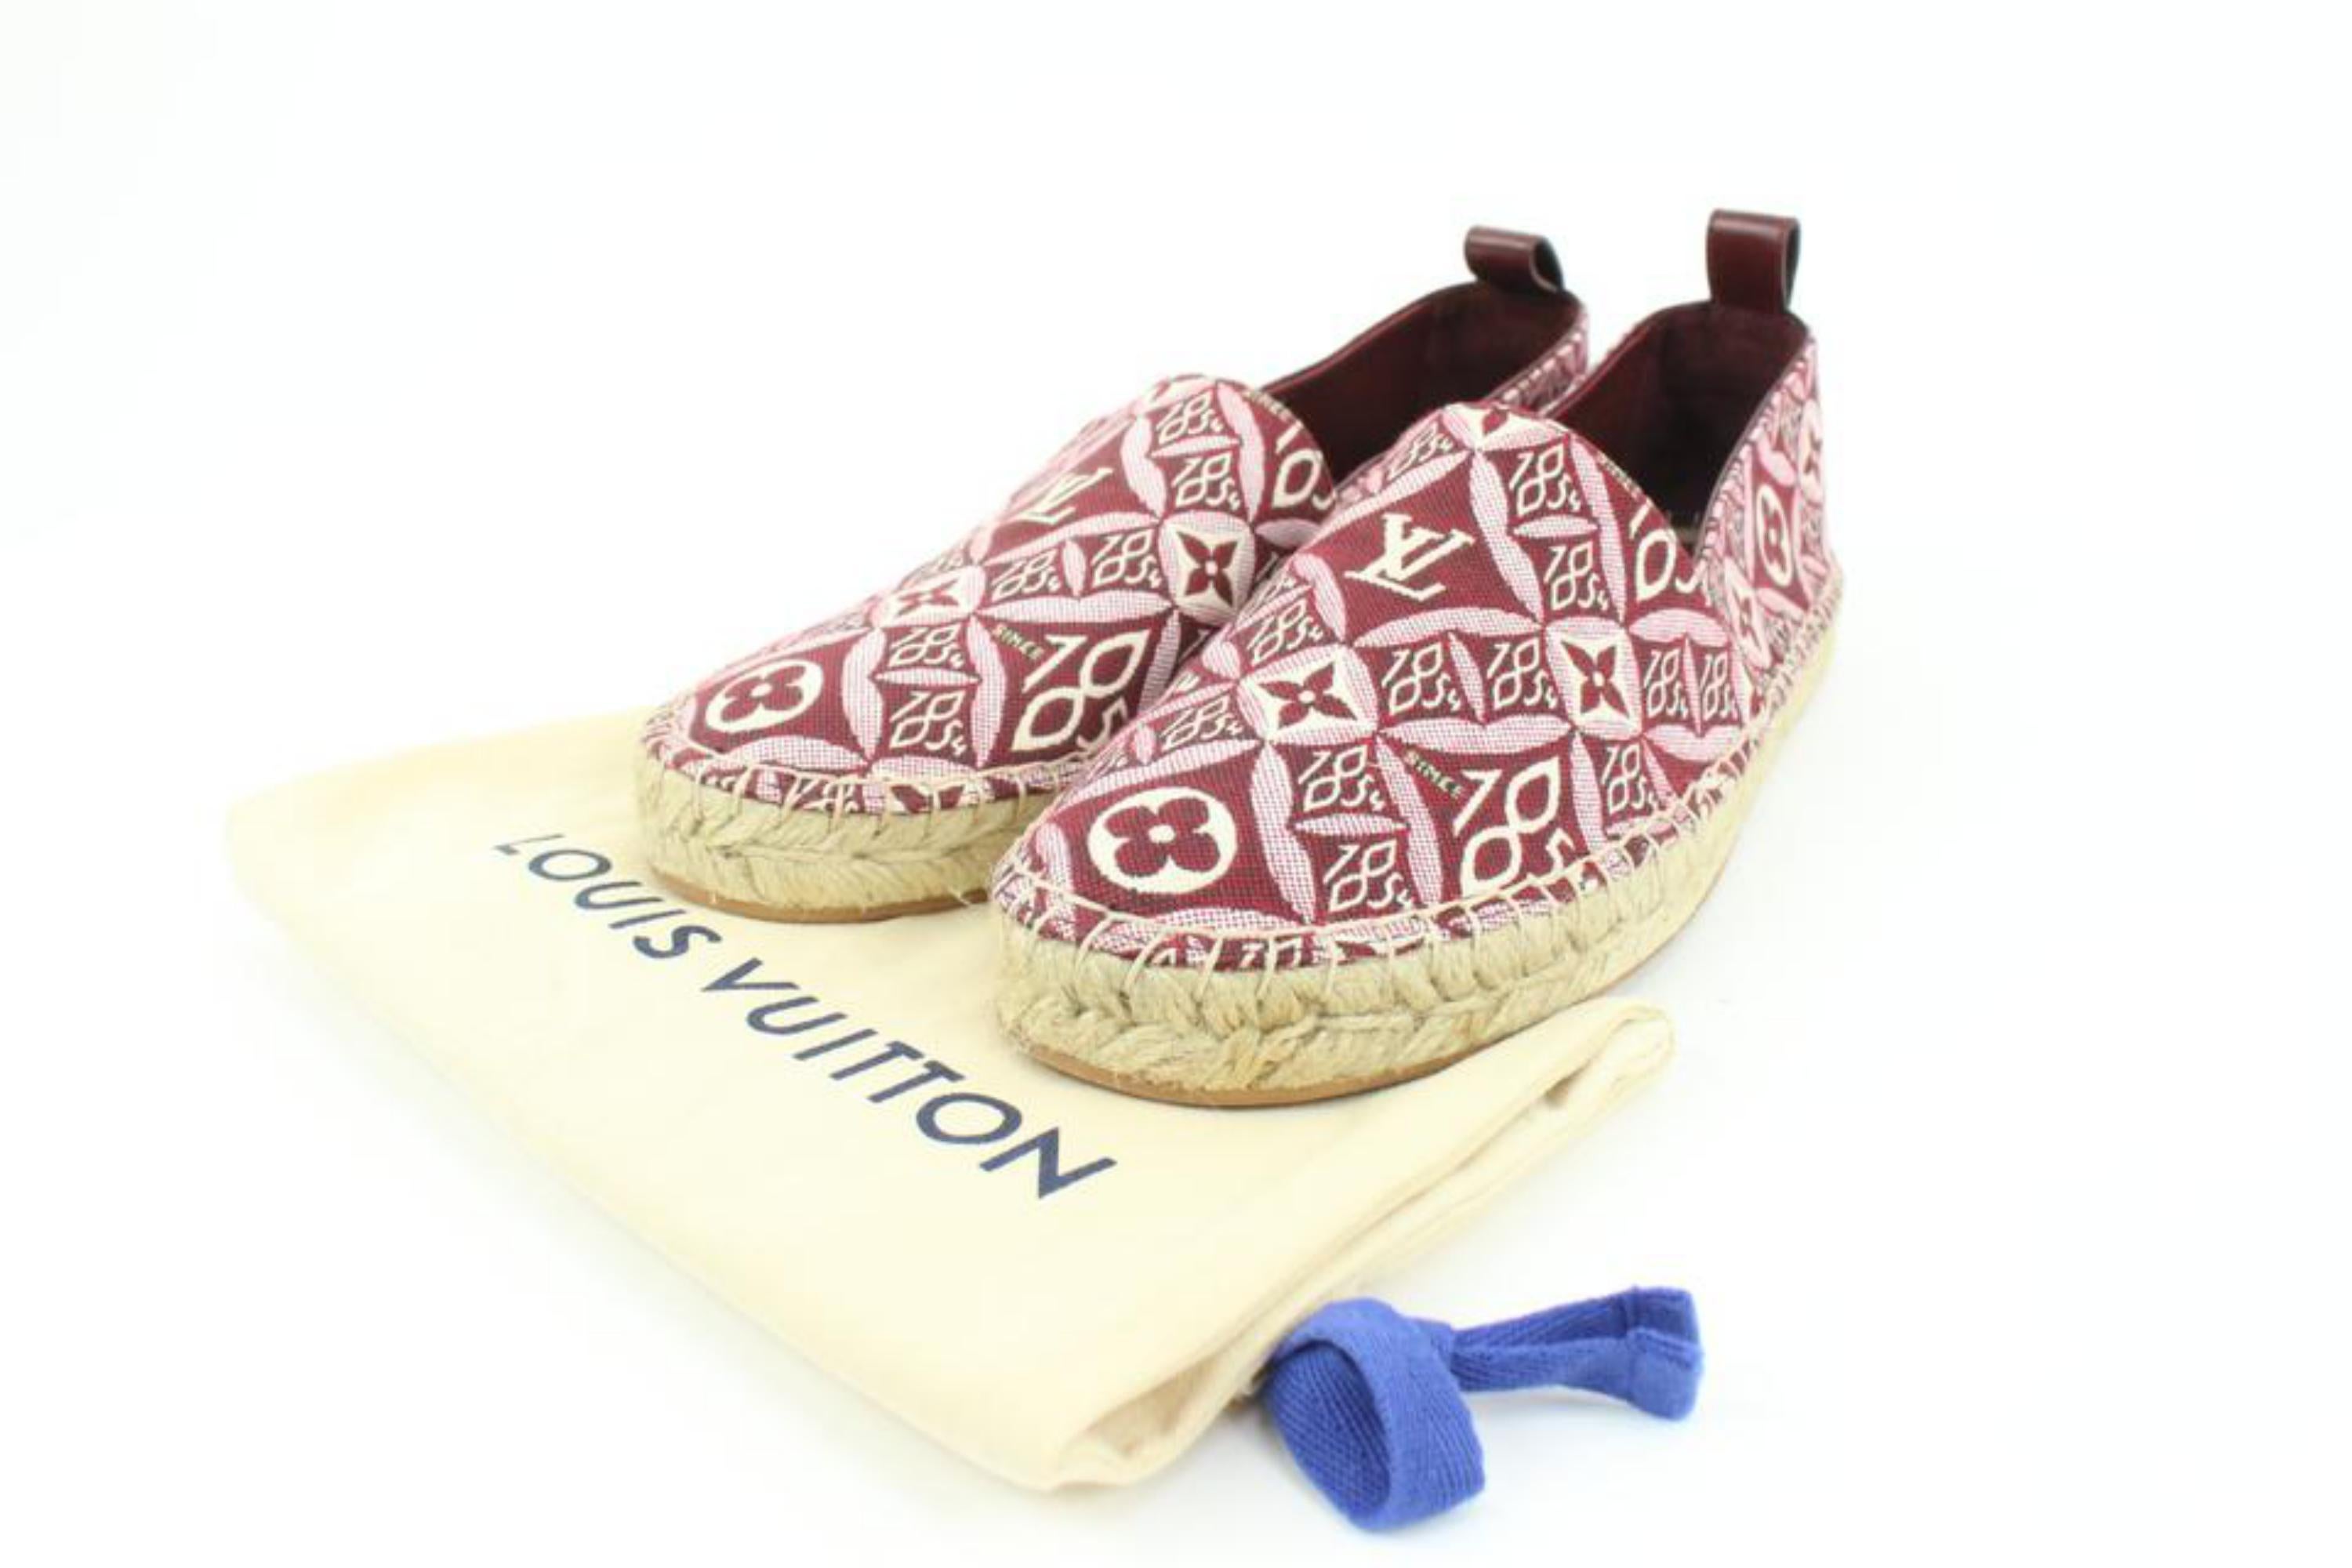 Louis Vuitton Sz 39.5 Burgundy Since 1854 Starboard Flat Espadrille s27lv99
Date Code/Serial Number: CL0260
Made In: Italy
Measurements: Length:  11